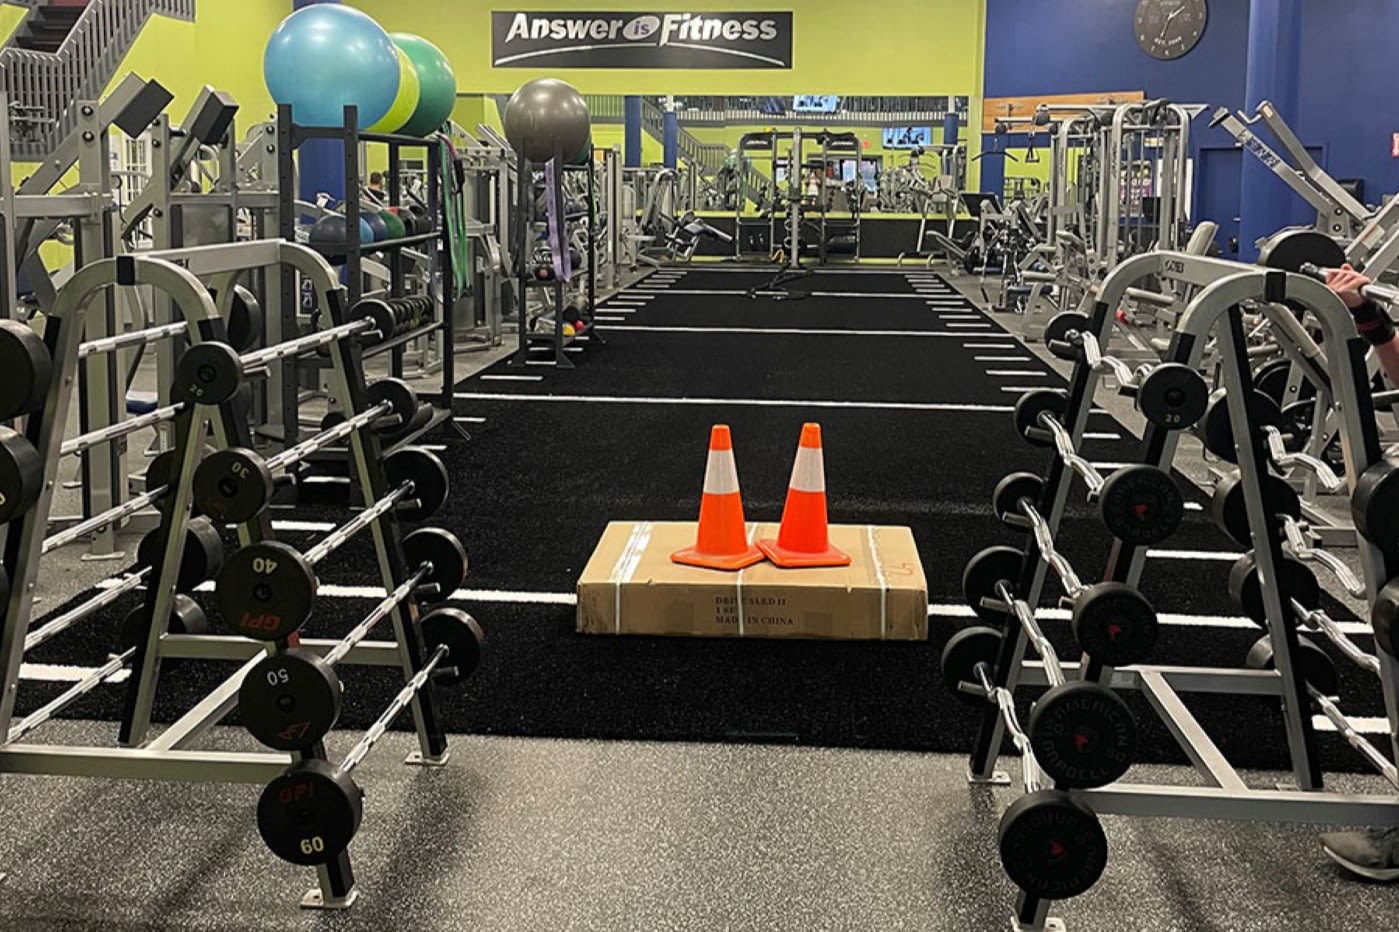 Town of Aurora - Are you intimidated by large gyms? Not quite sure how to  work the exercise machines? Head on over to Club Aurora Fitness on November  9 and join one